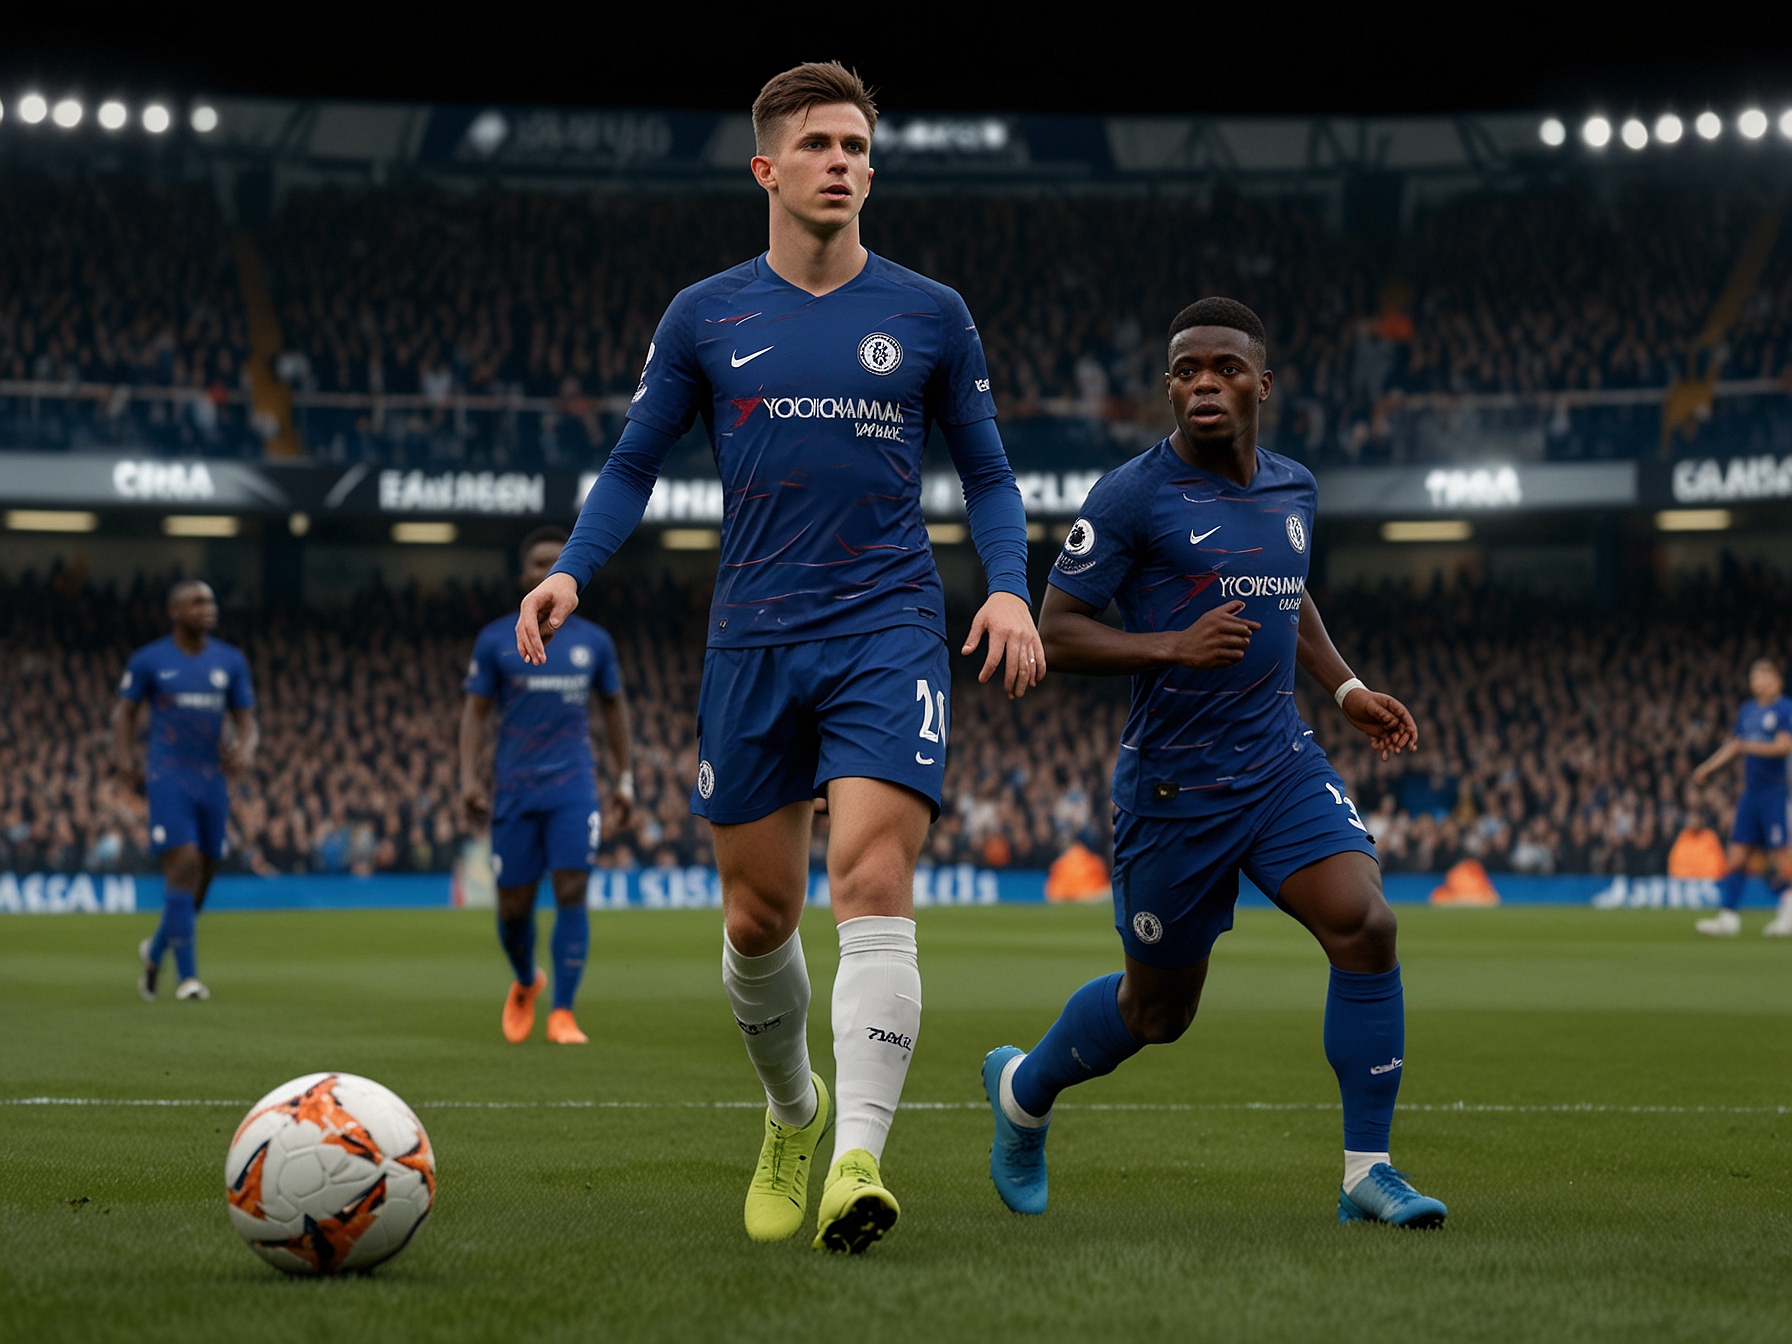 A depiction of Chelsea's strategic loan system, highlighting past successful loanees like Mason Mount and Fikayo Tomori, showcasing the importance of loan spells for young players' development.